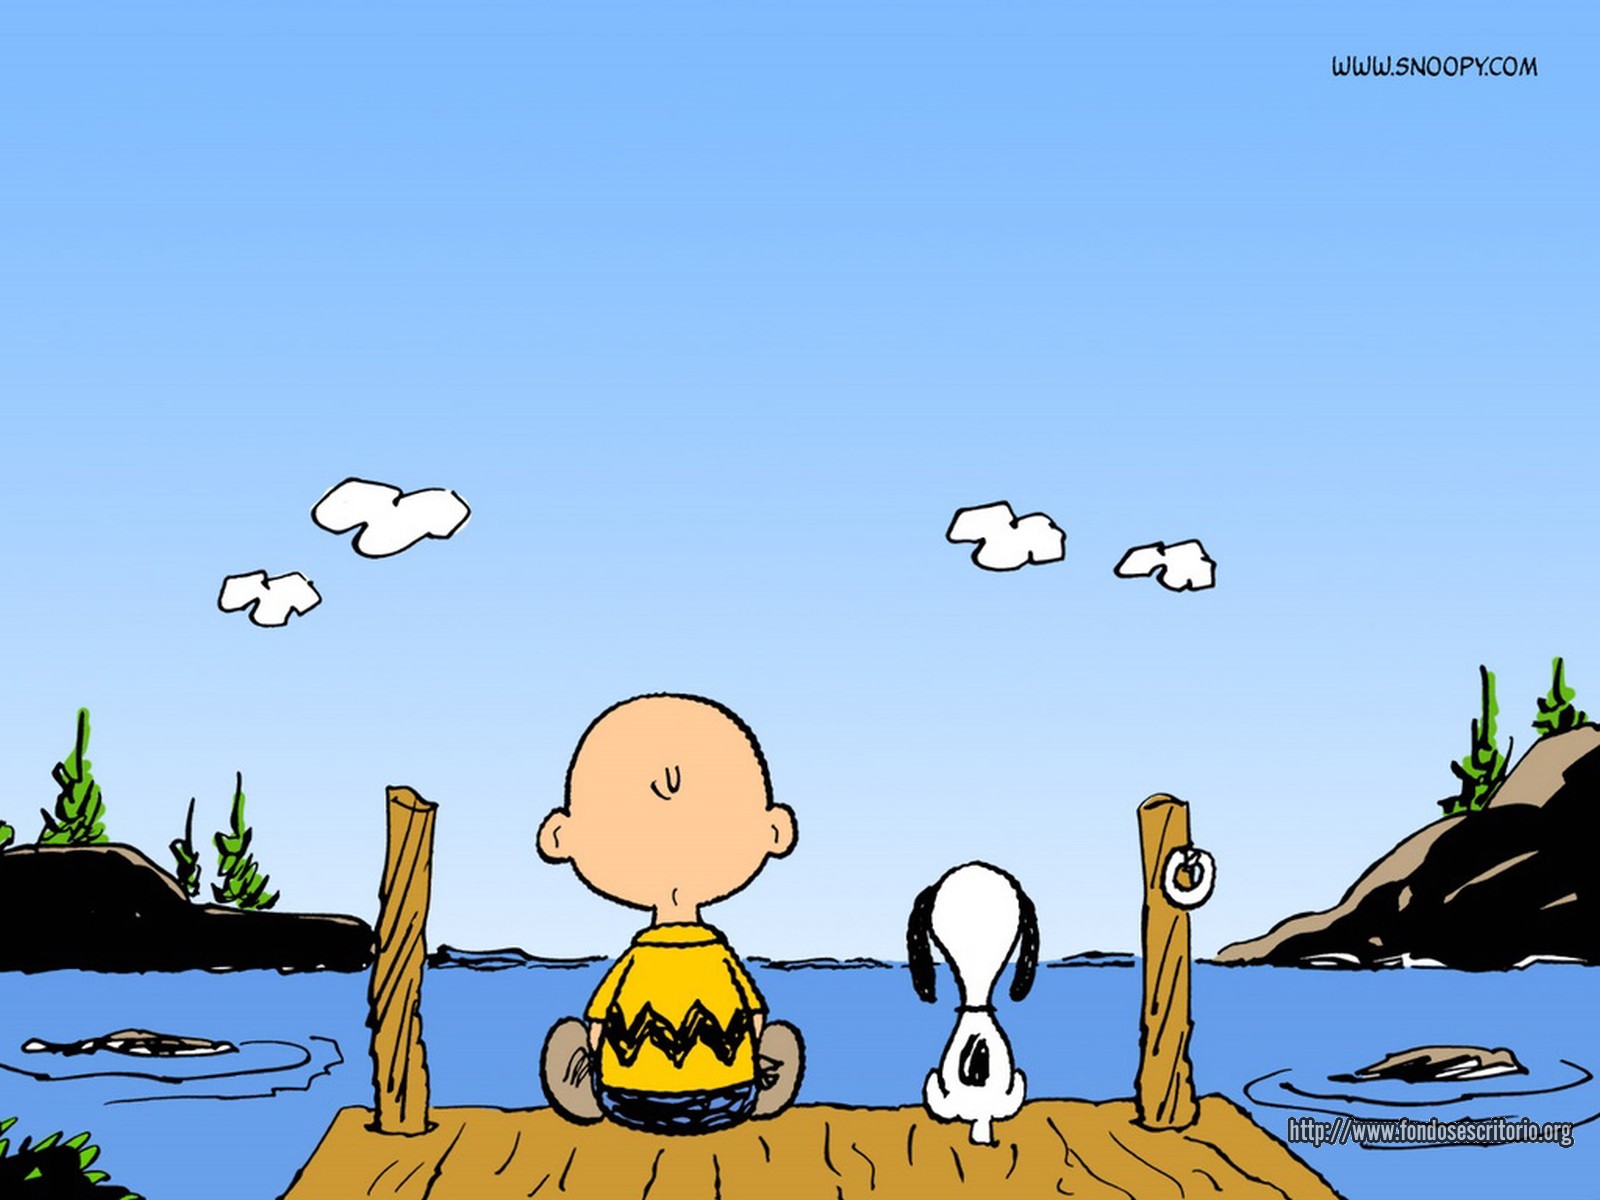 Snoopy Peanuts Desktop Wallpaper Picture Collections